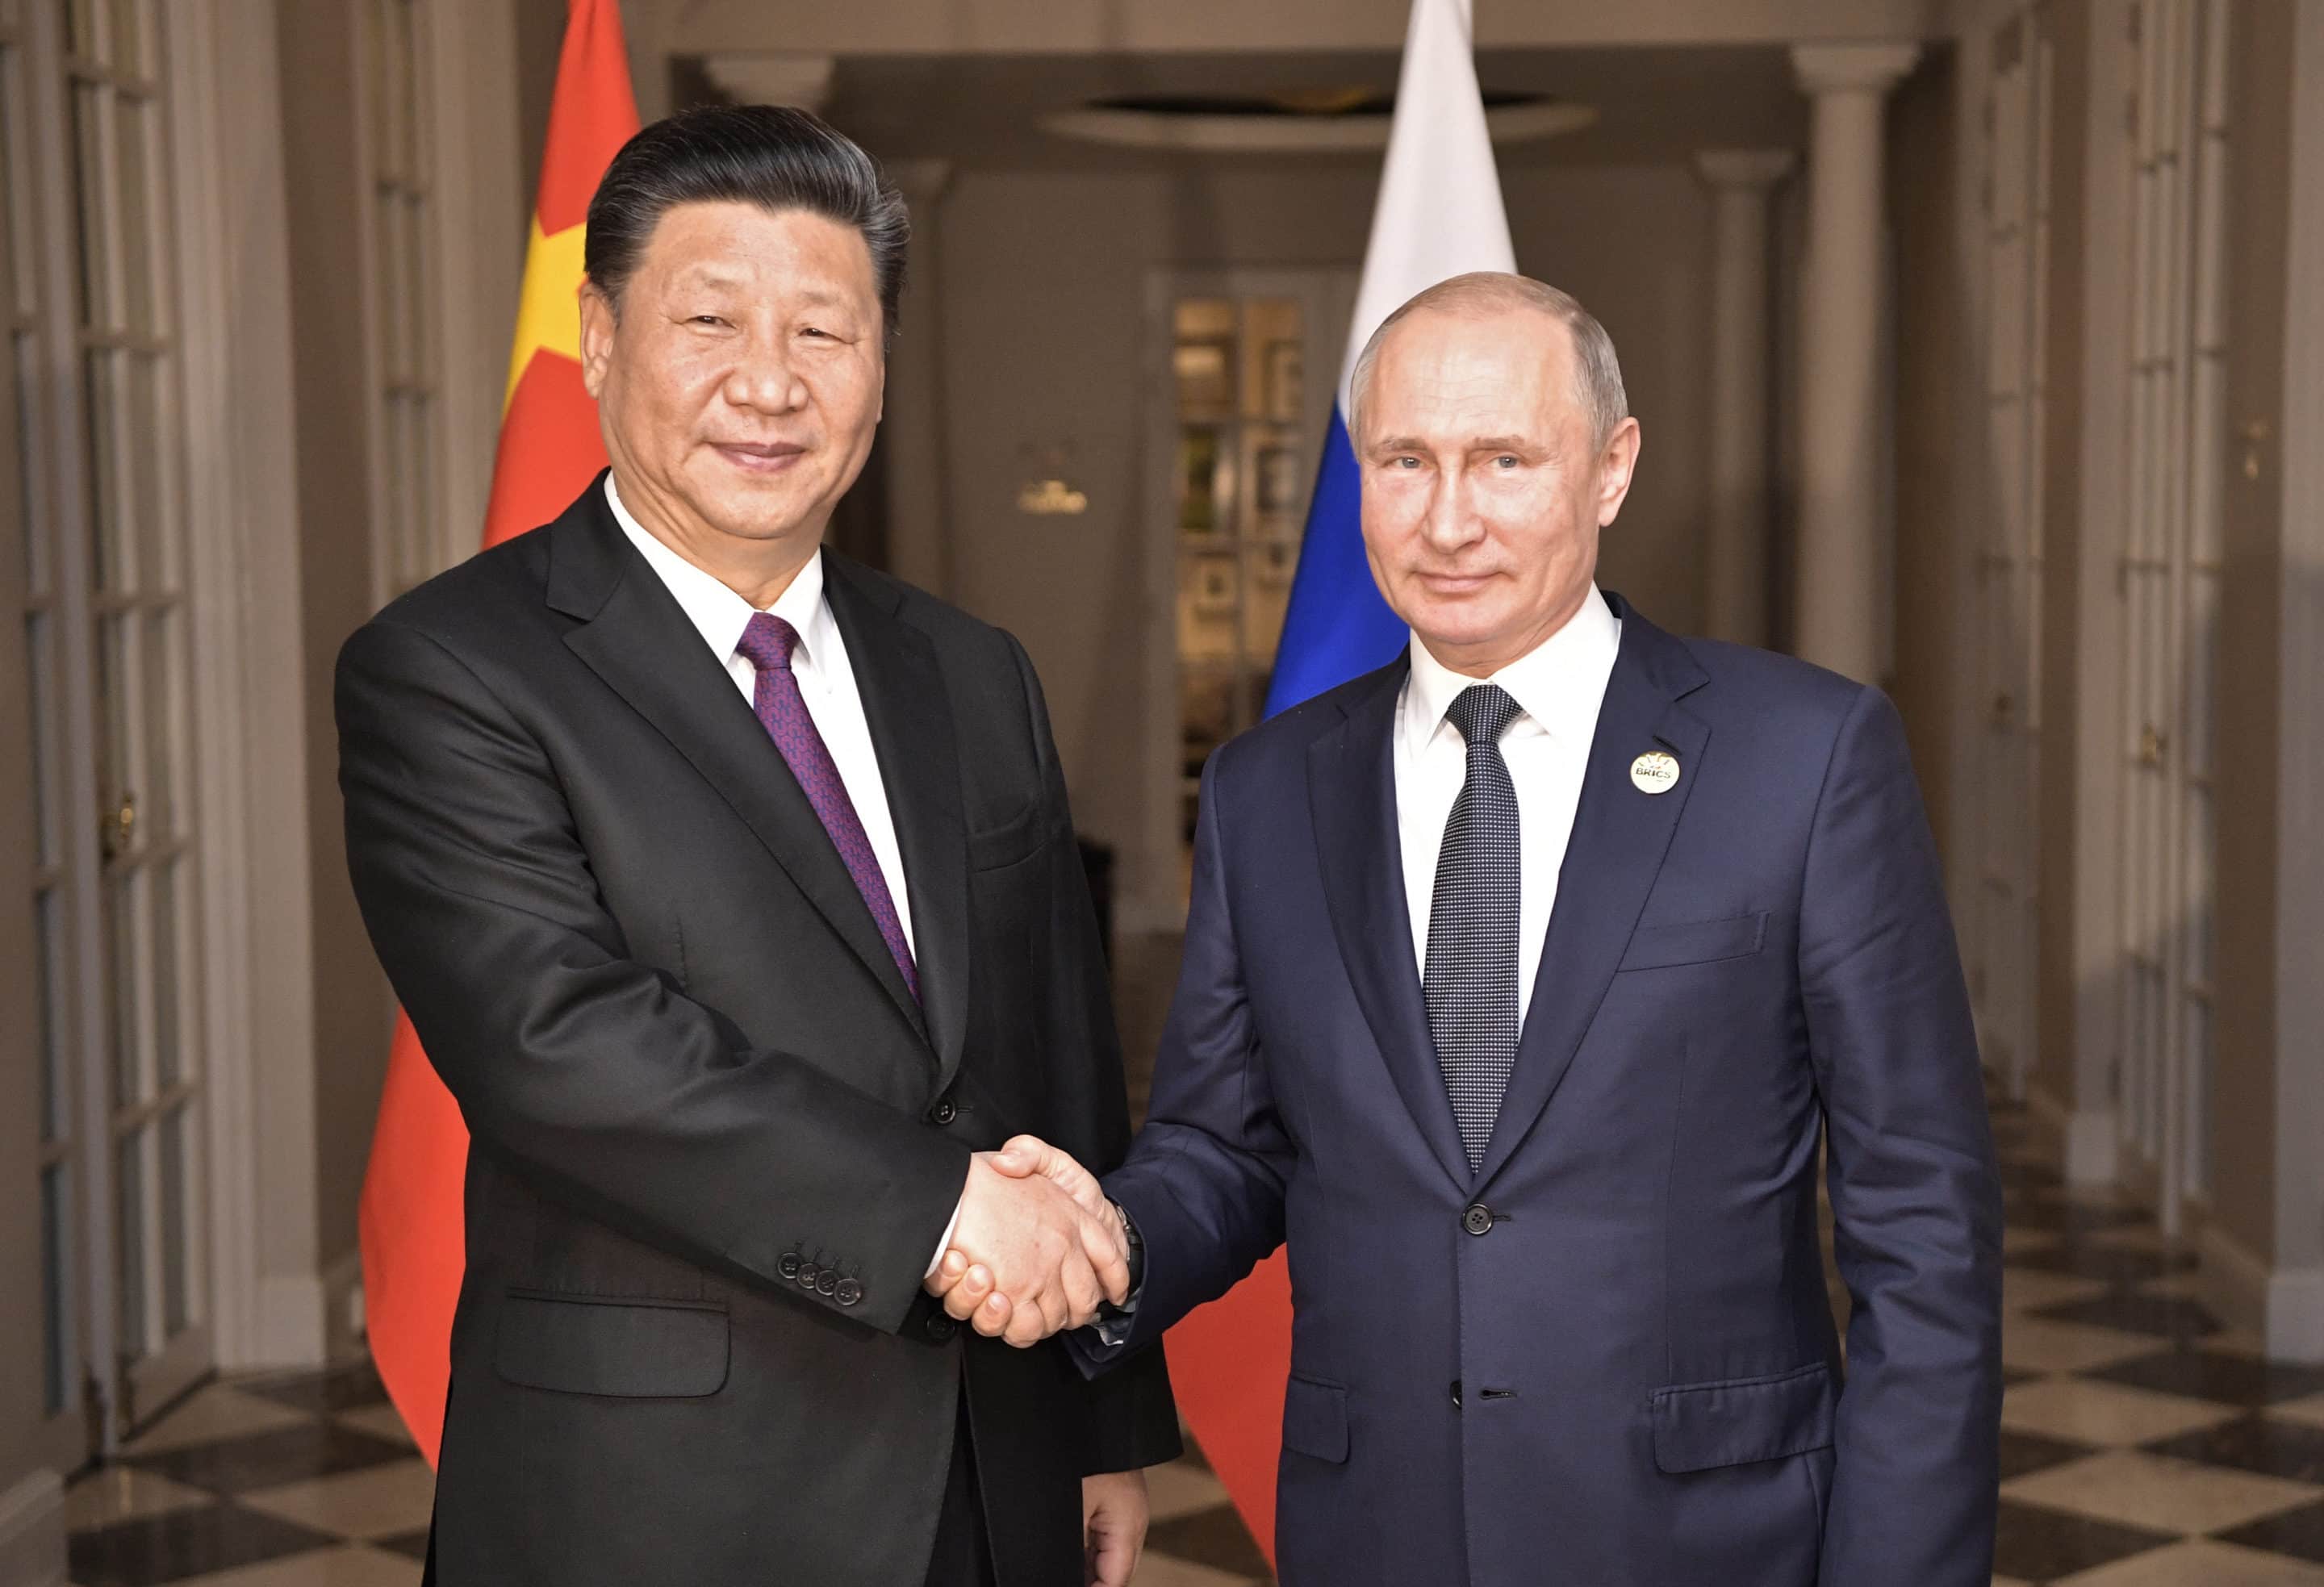 Putin Arrives in China to Meet with Xi